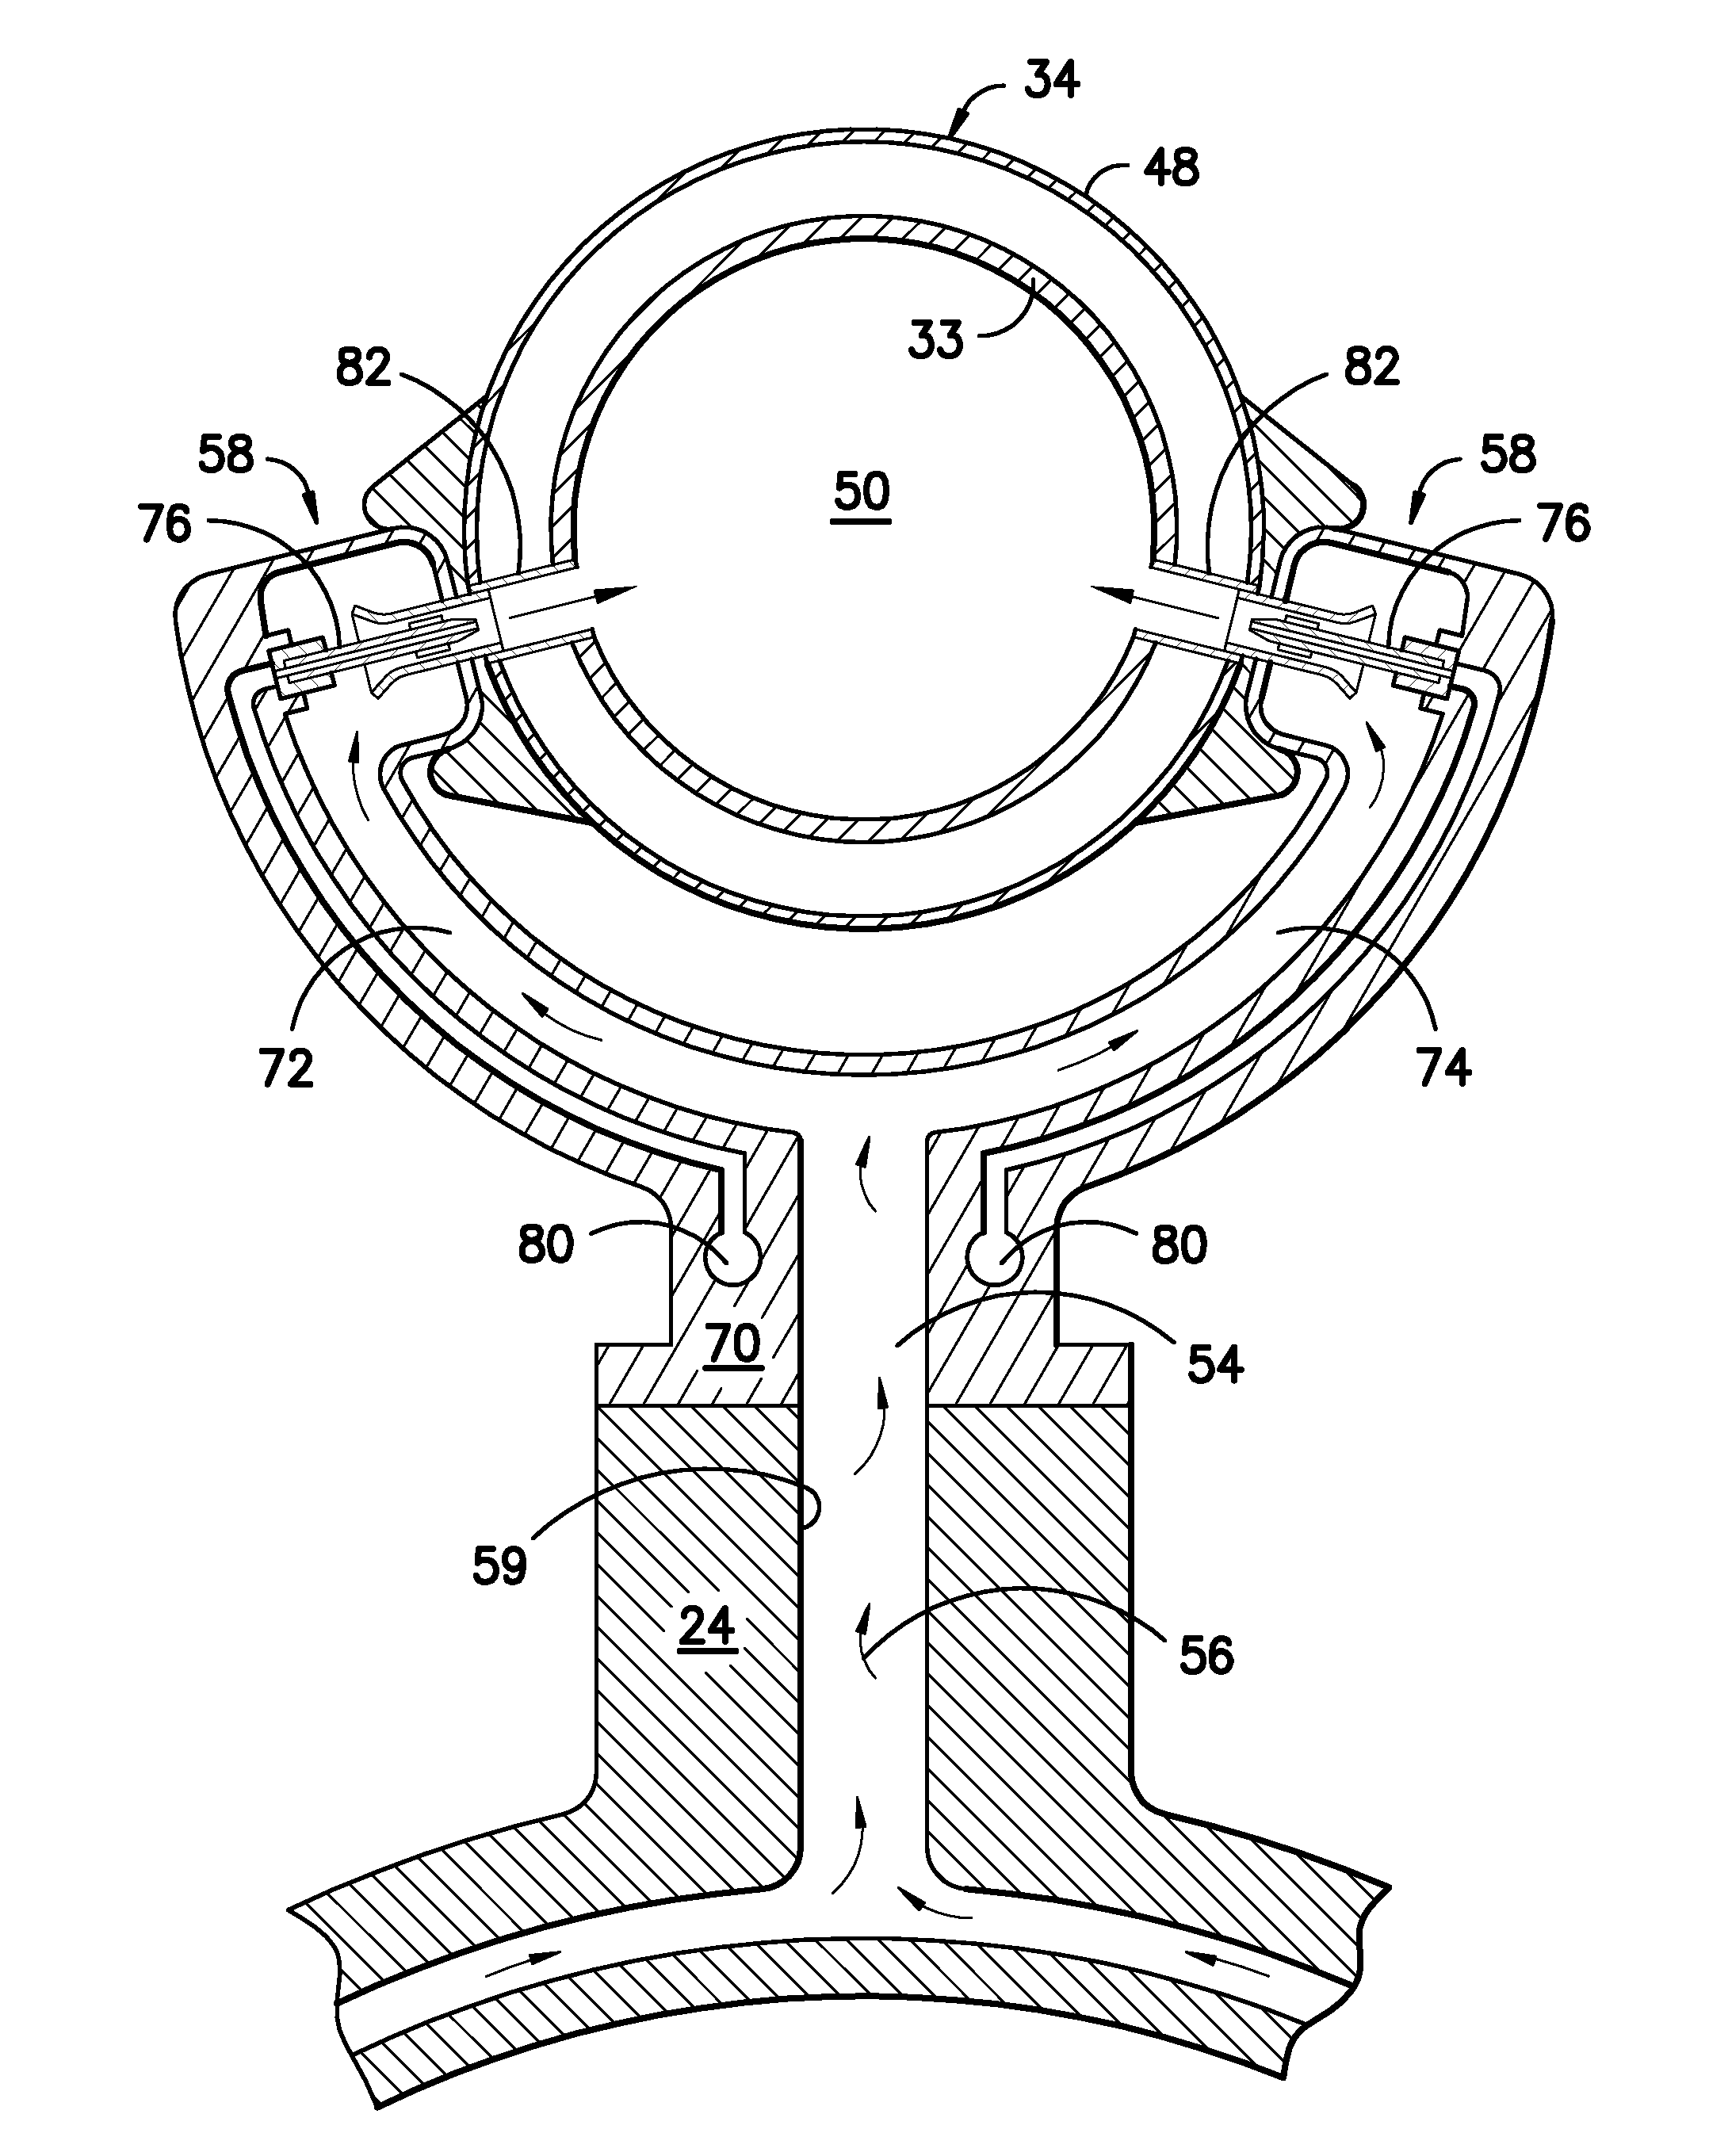 Bled diffuser fed secondary combustion system for gas turbines